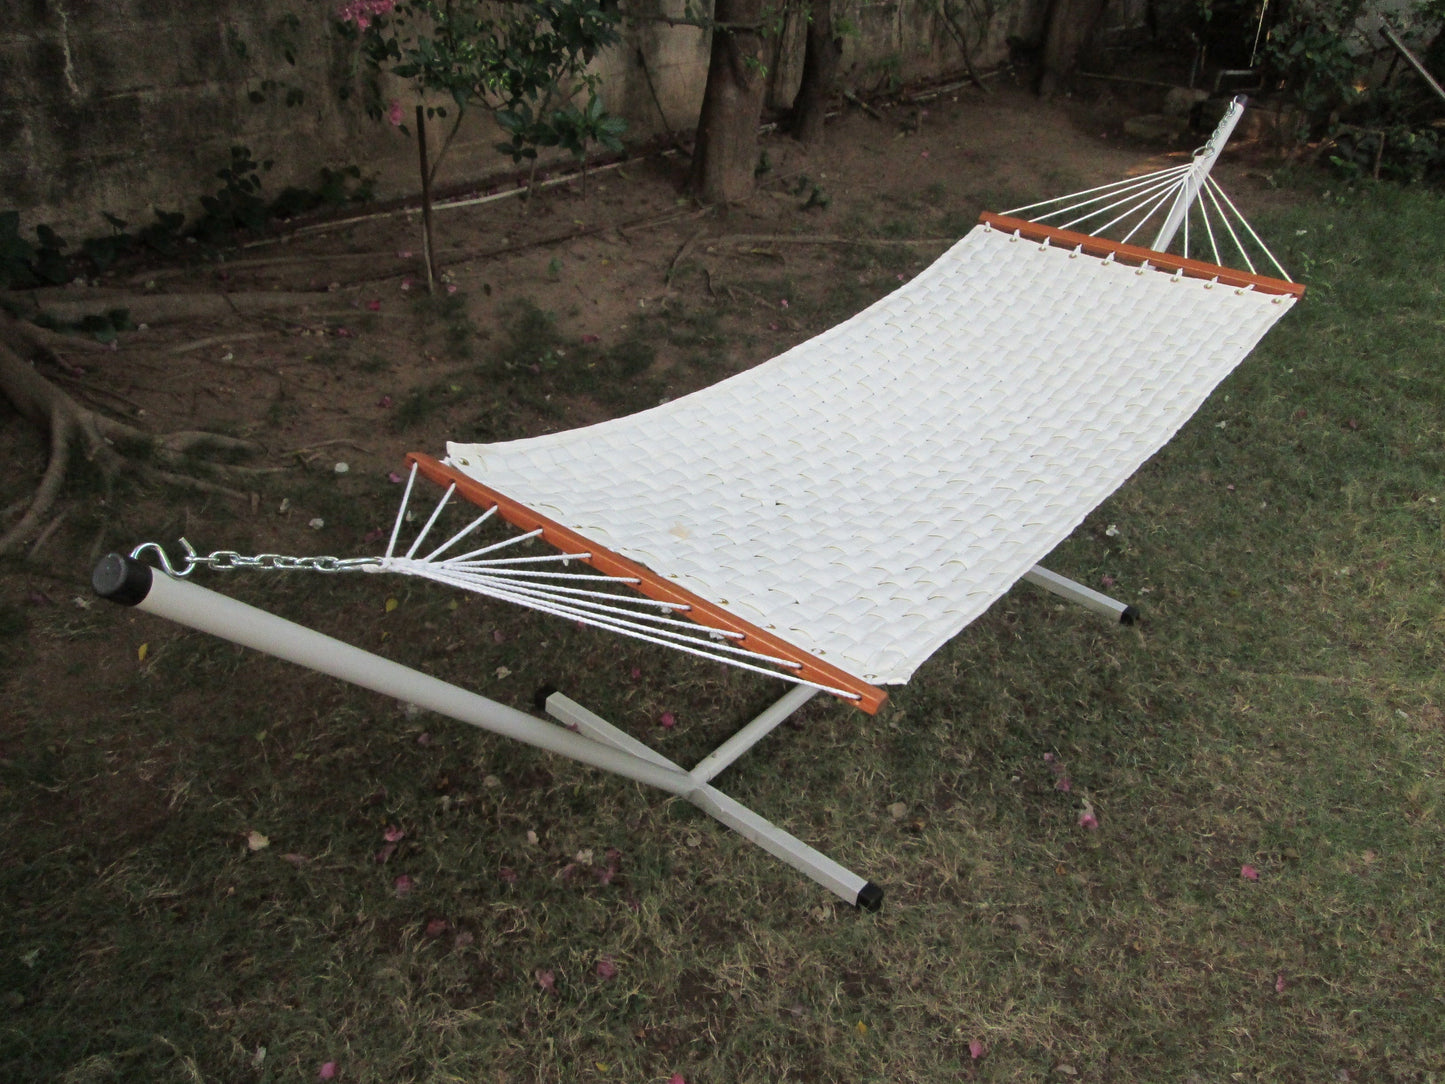 Premium Weave Soft Comb Off-White Hammock Set With Steel Hammock Stand, Weight Capacity of 125 kg